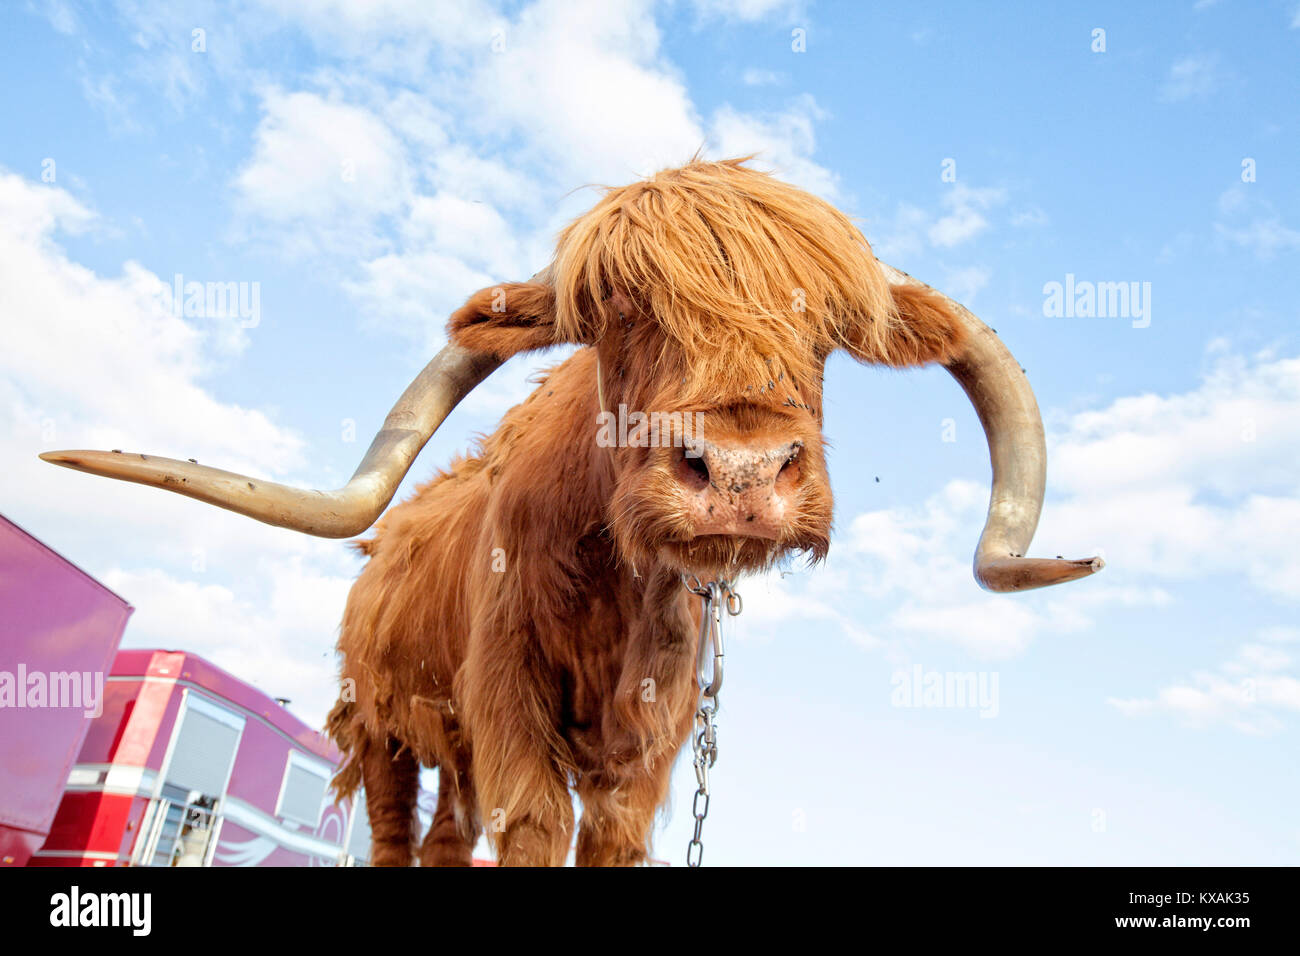 Tibetan Cow infested with flies at Zavatta Circus, Kerroch, Brittany, France Stock Photo